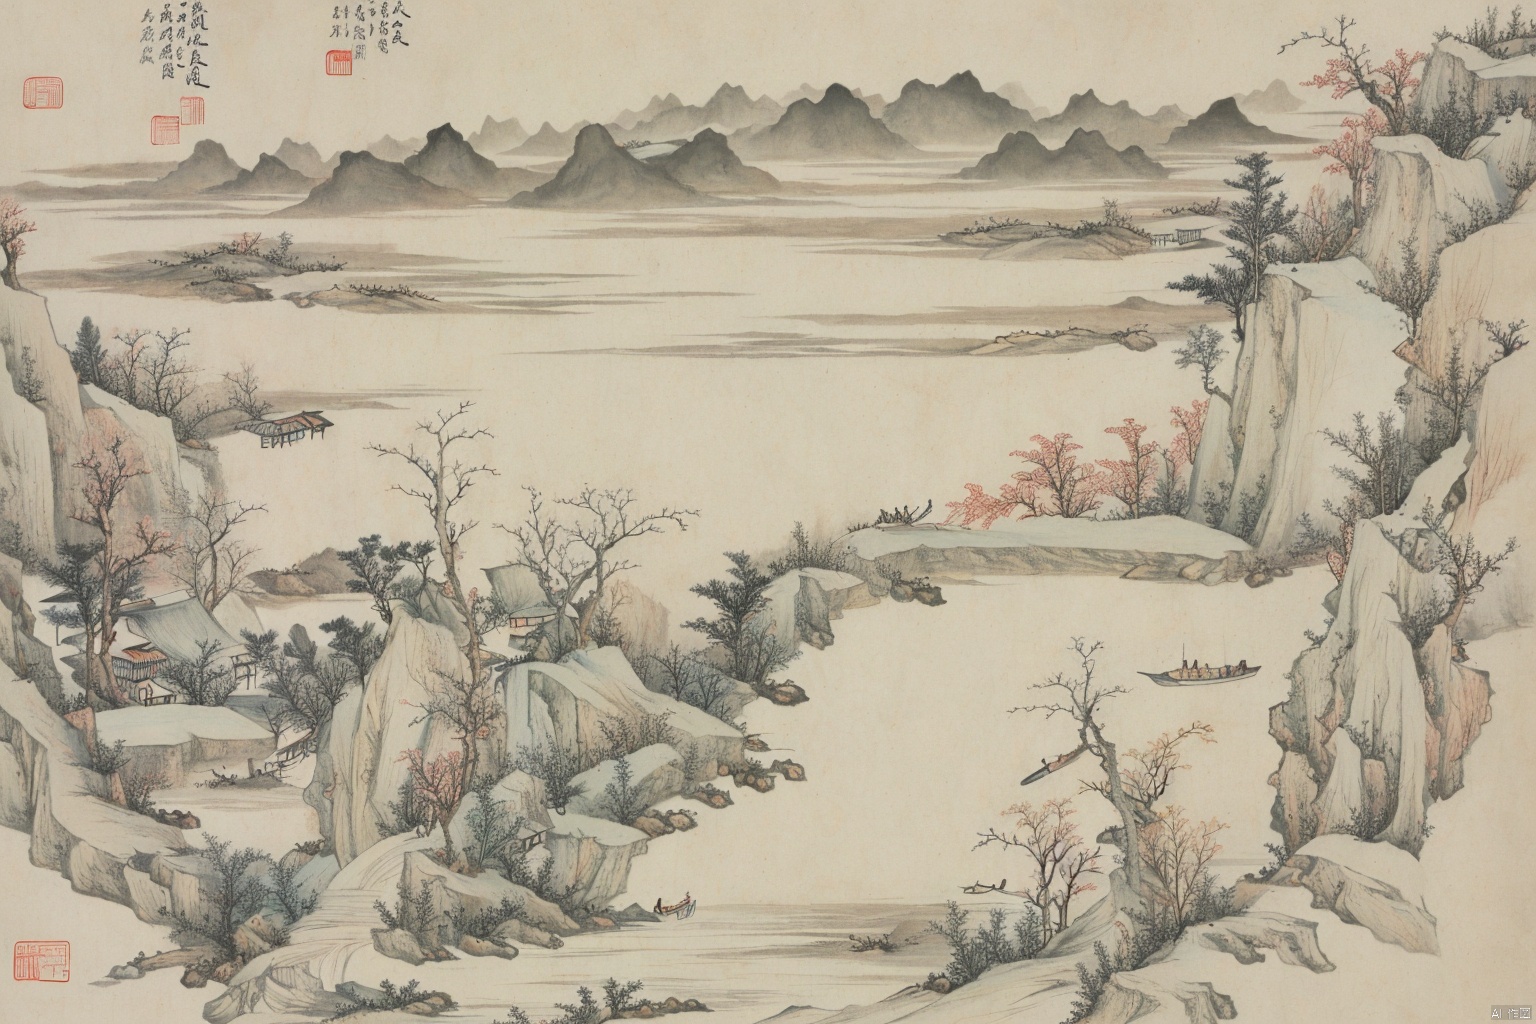 Chinese style ink landscape painting, trees, mountains, rivers, huts, boats, gf